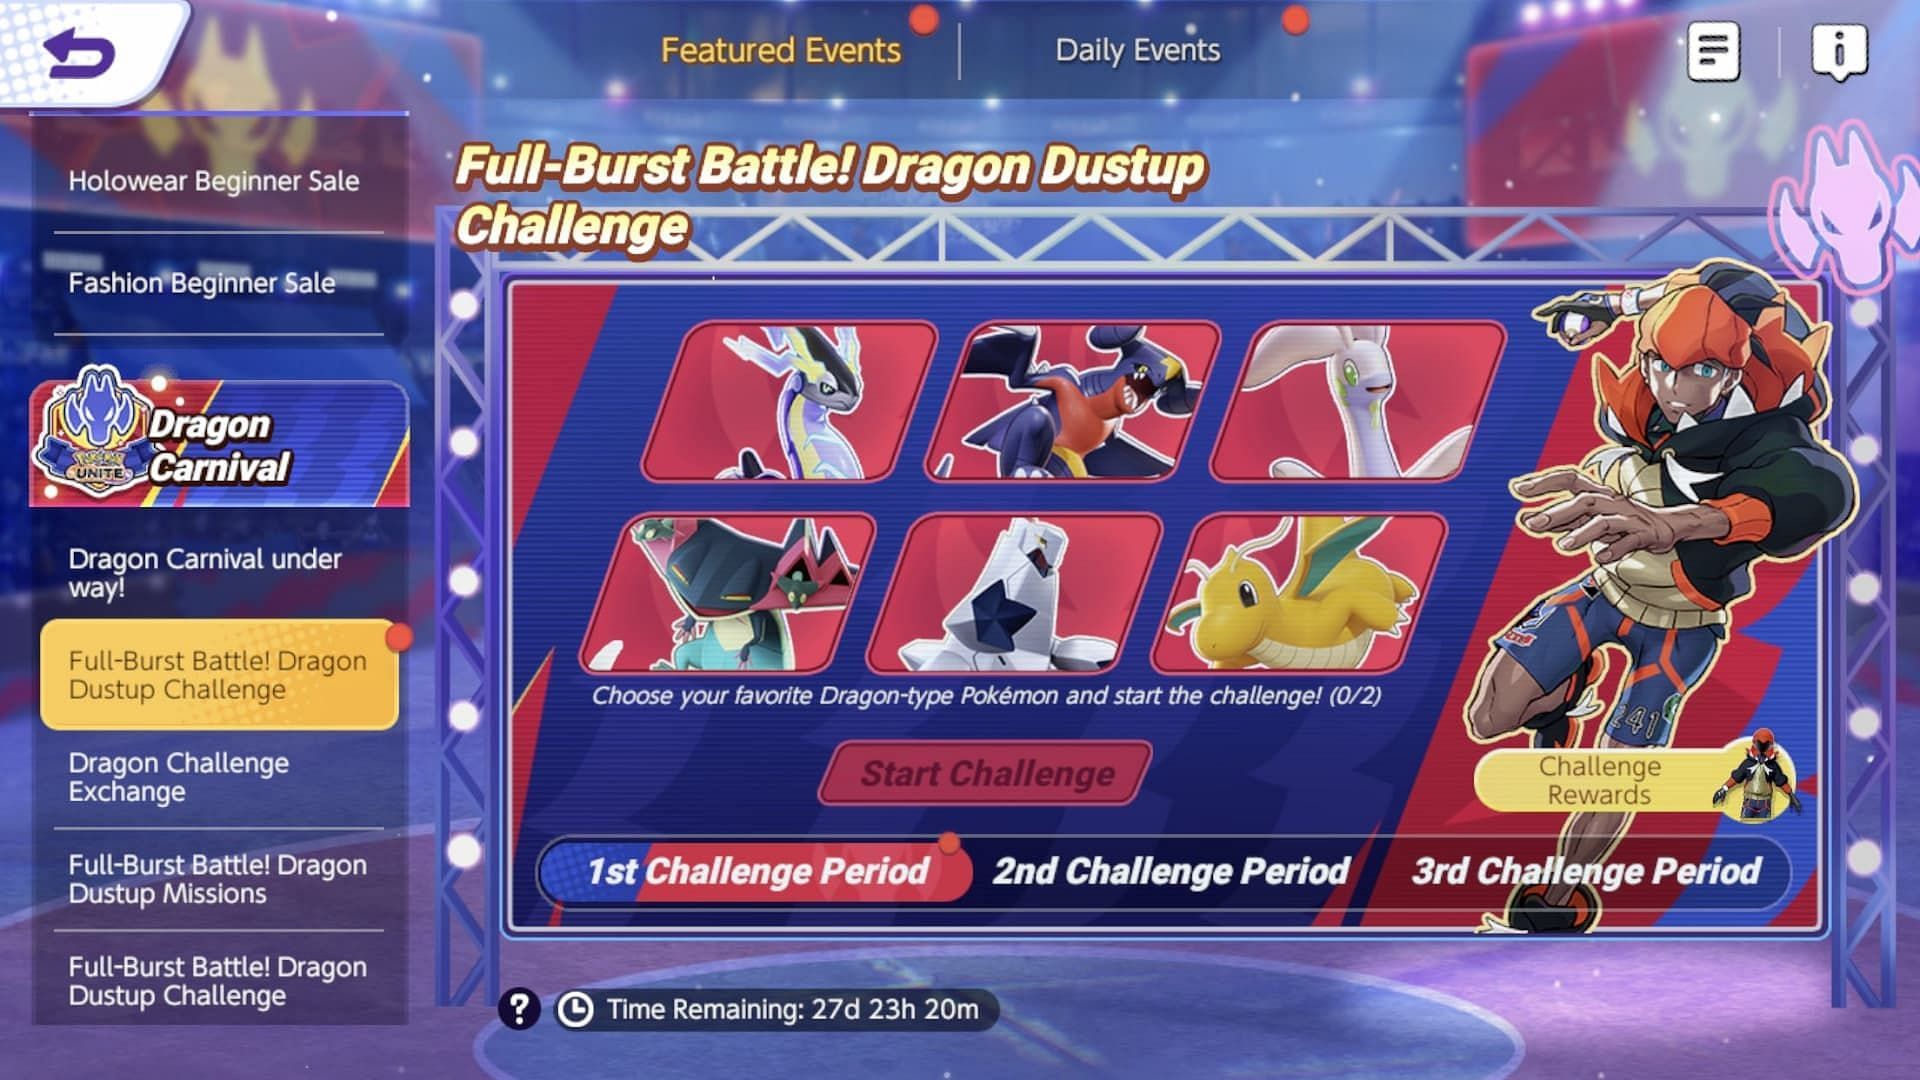 How to get started with the Dragon Carnival (Image via The Pokemon Company)